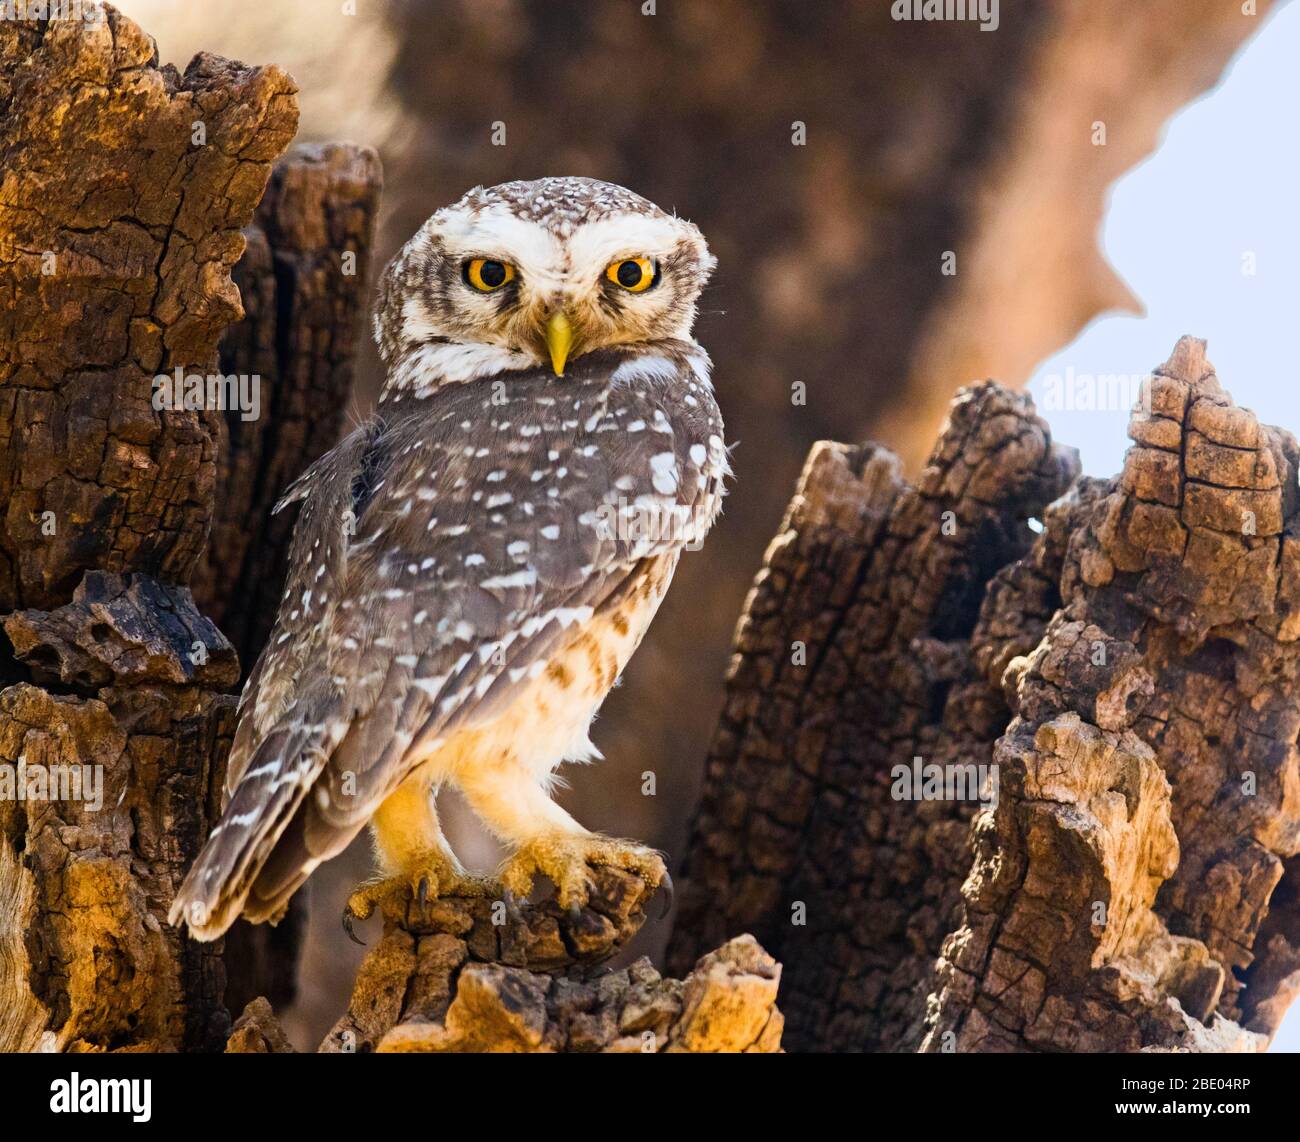 Spotted owlet (Athene brama) looking at camera, India Stock Photo